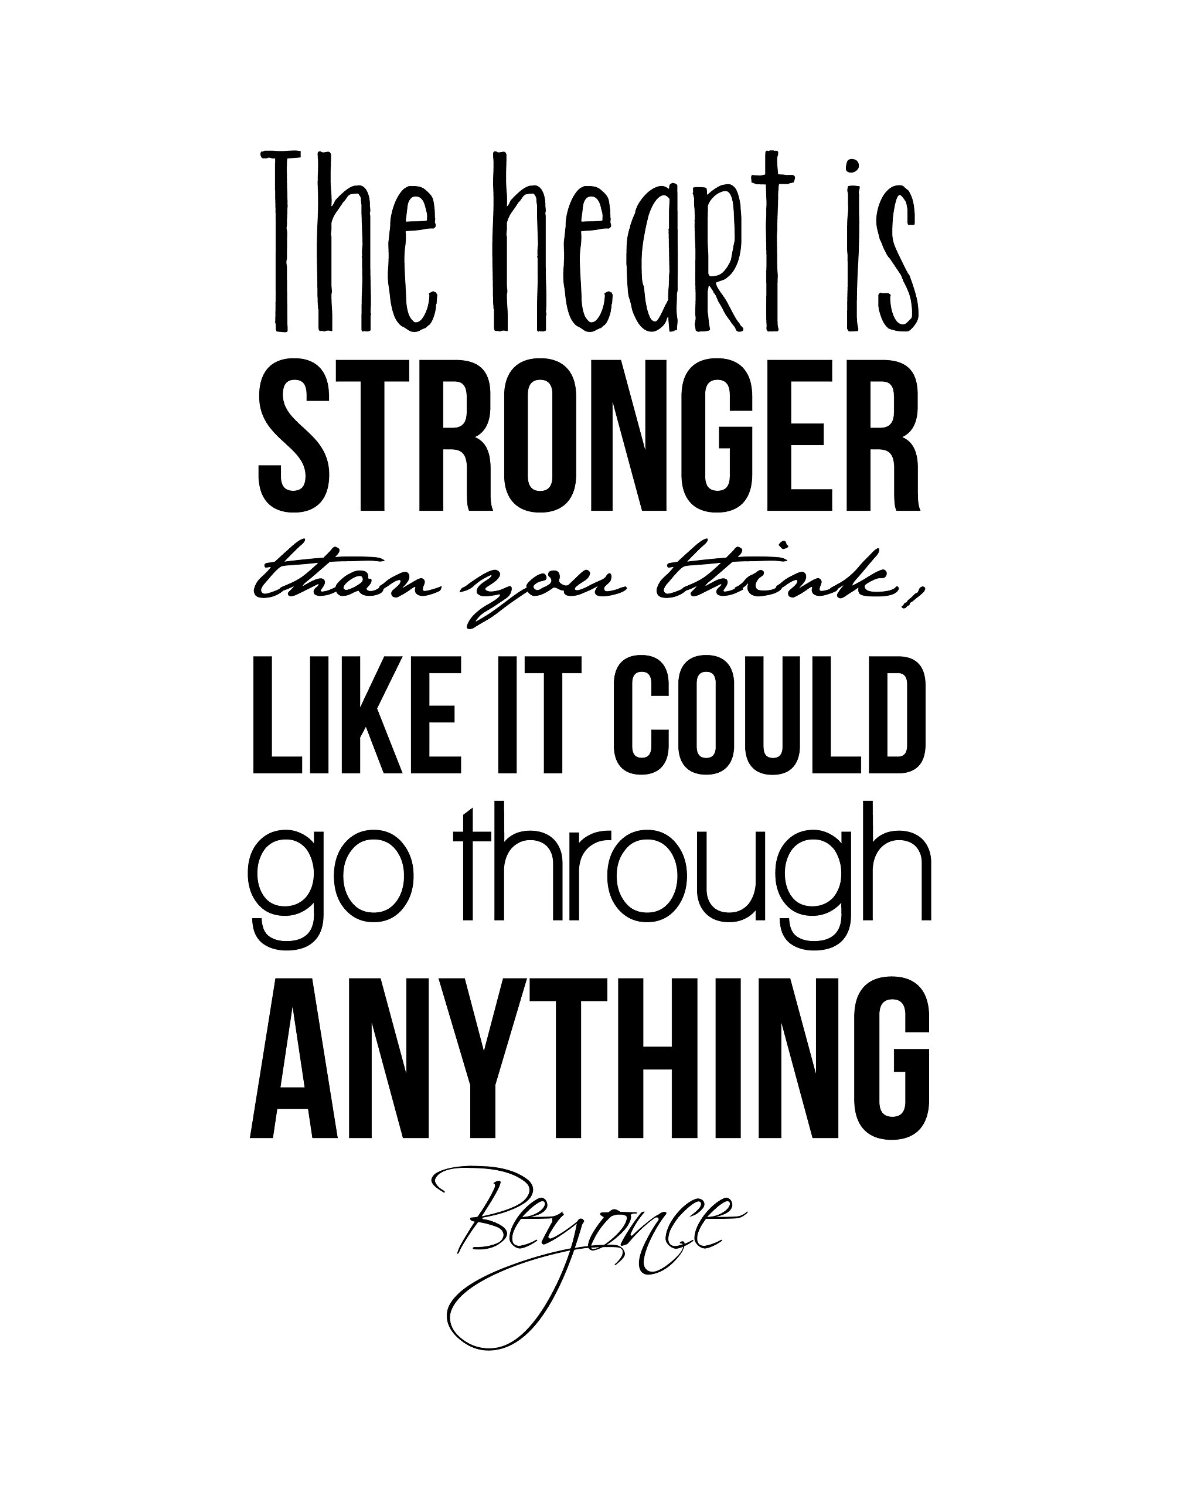 The Heart Is Stronger Beyonce Daily Quotes Sayings Pictures